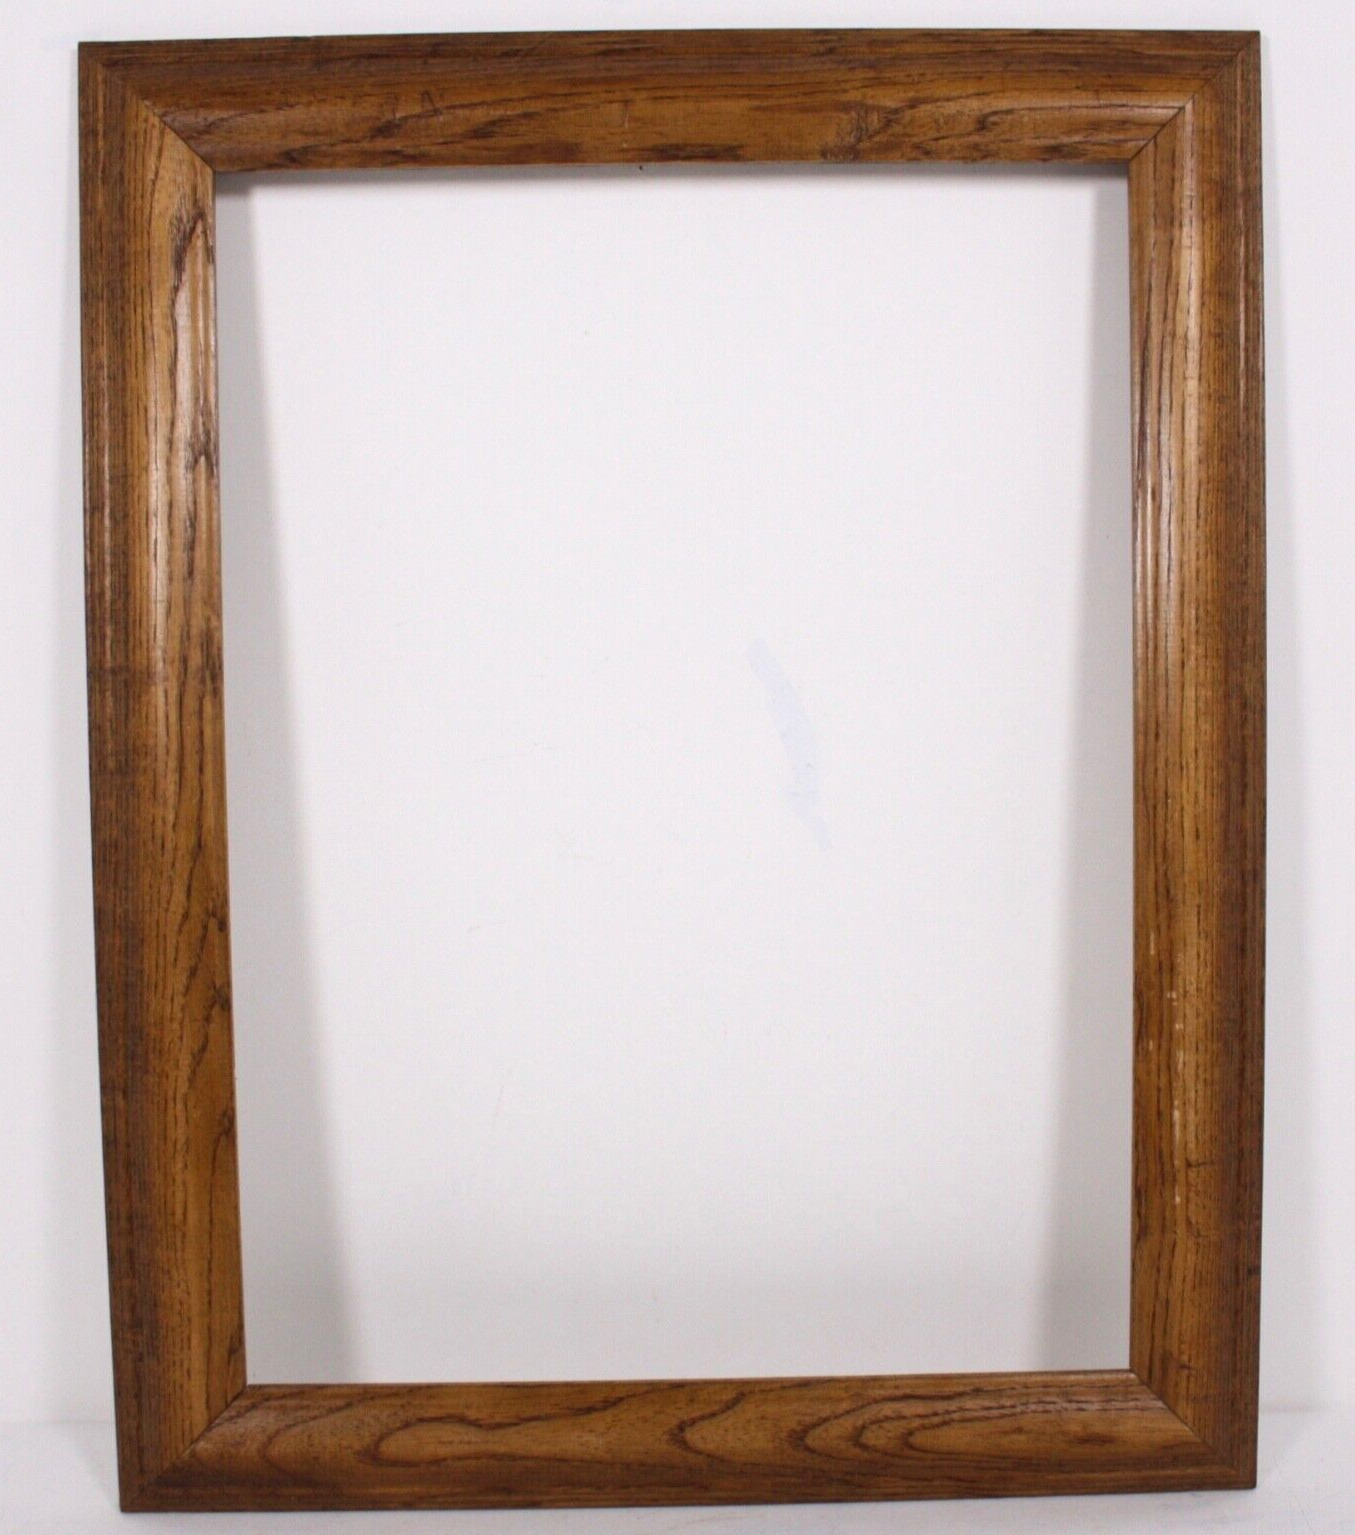 Solid Oak Classic True Vtg 19.5x16.5 Rustic Wood Frame for 16x12 Painting Print